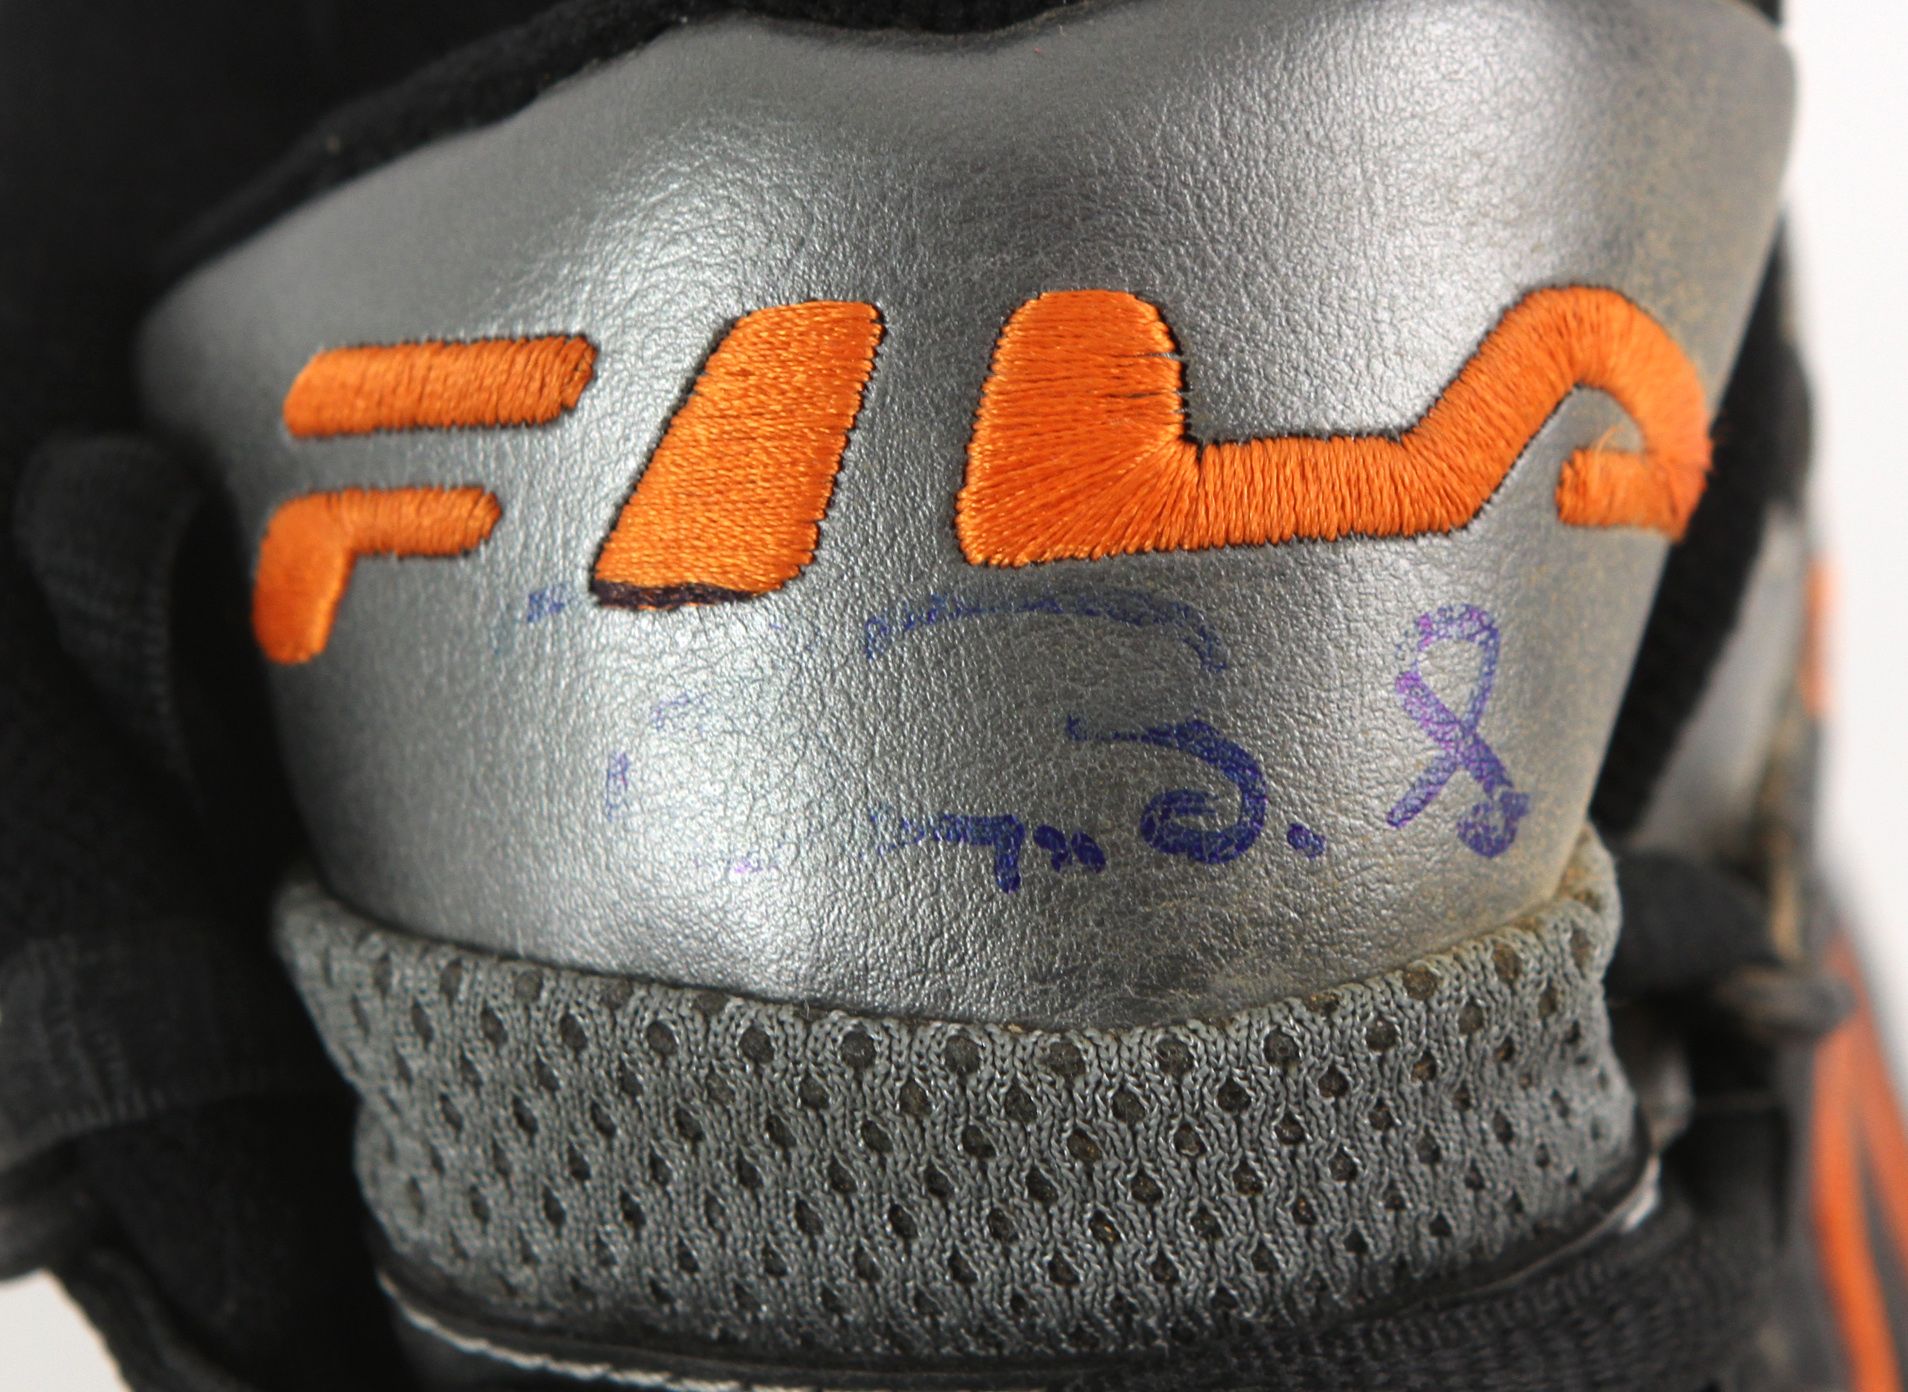 BARRY BONDS SAN FRANCISCO GIANTS SIGNED GAME ISSUE FILA TURF SHOE CLEAT  BECKETT